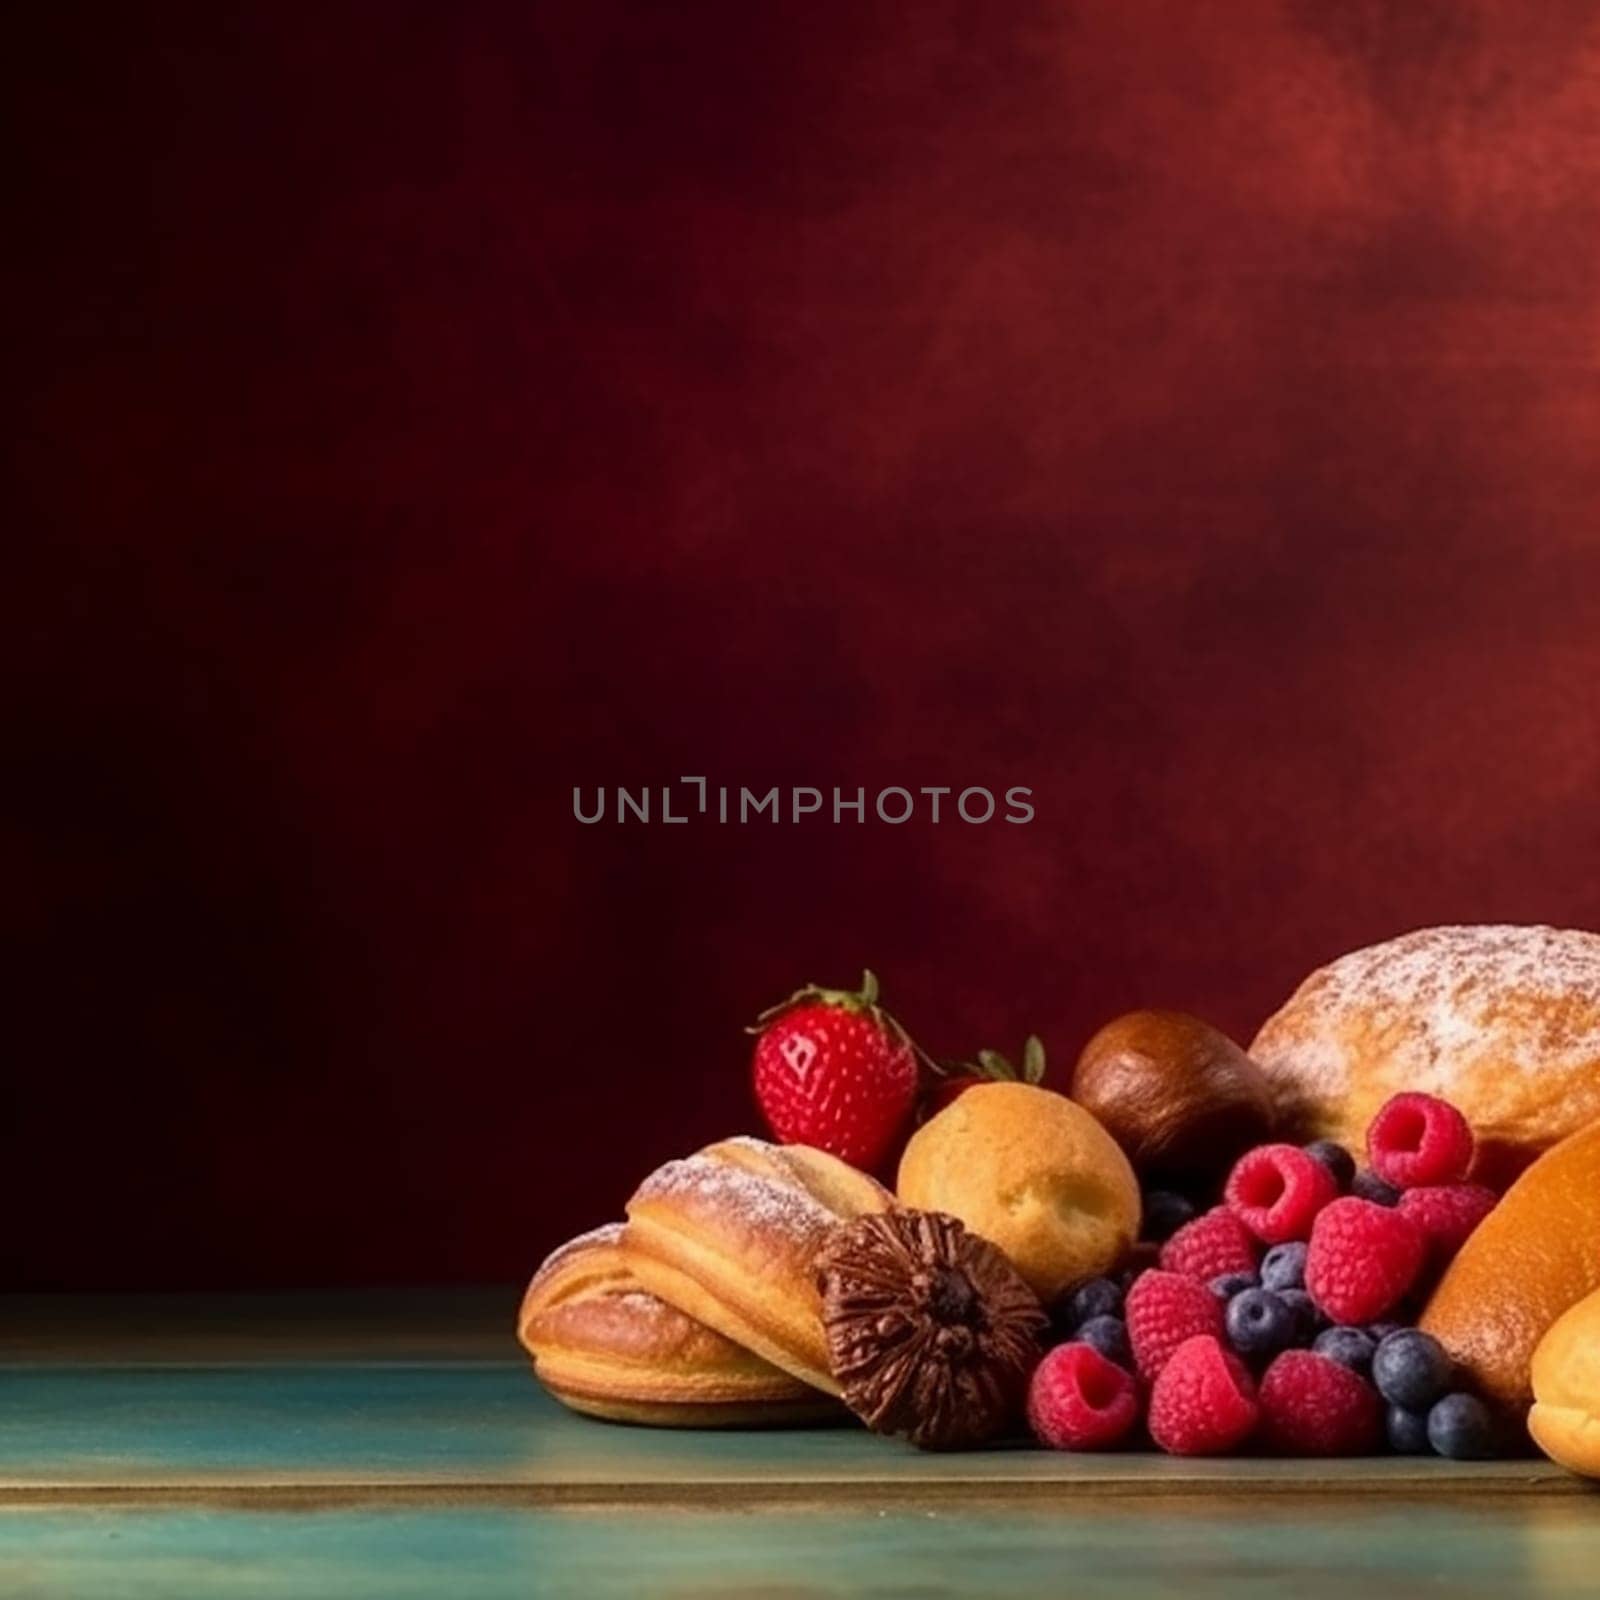 Assorted fresh berries and pastries displayed on a wooden surface.